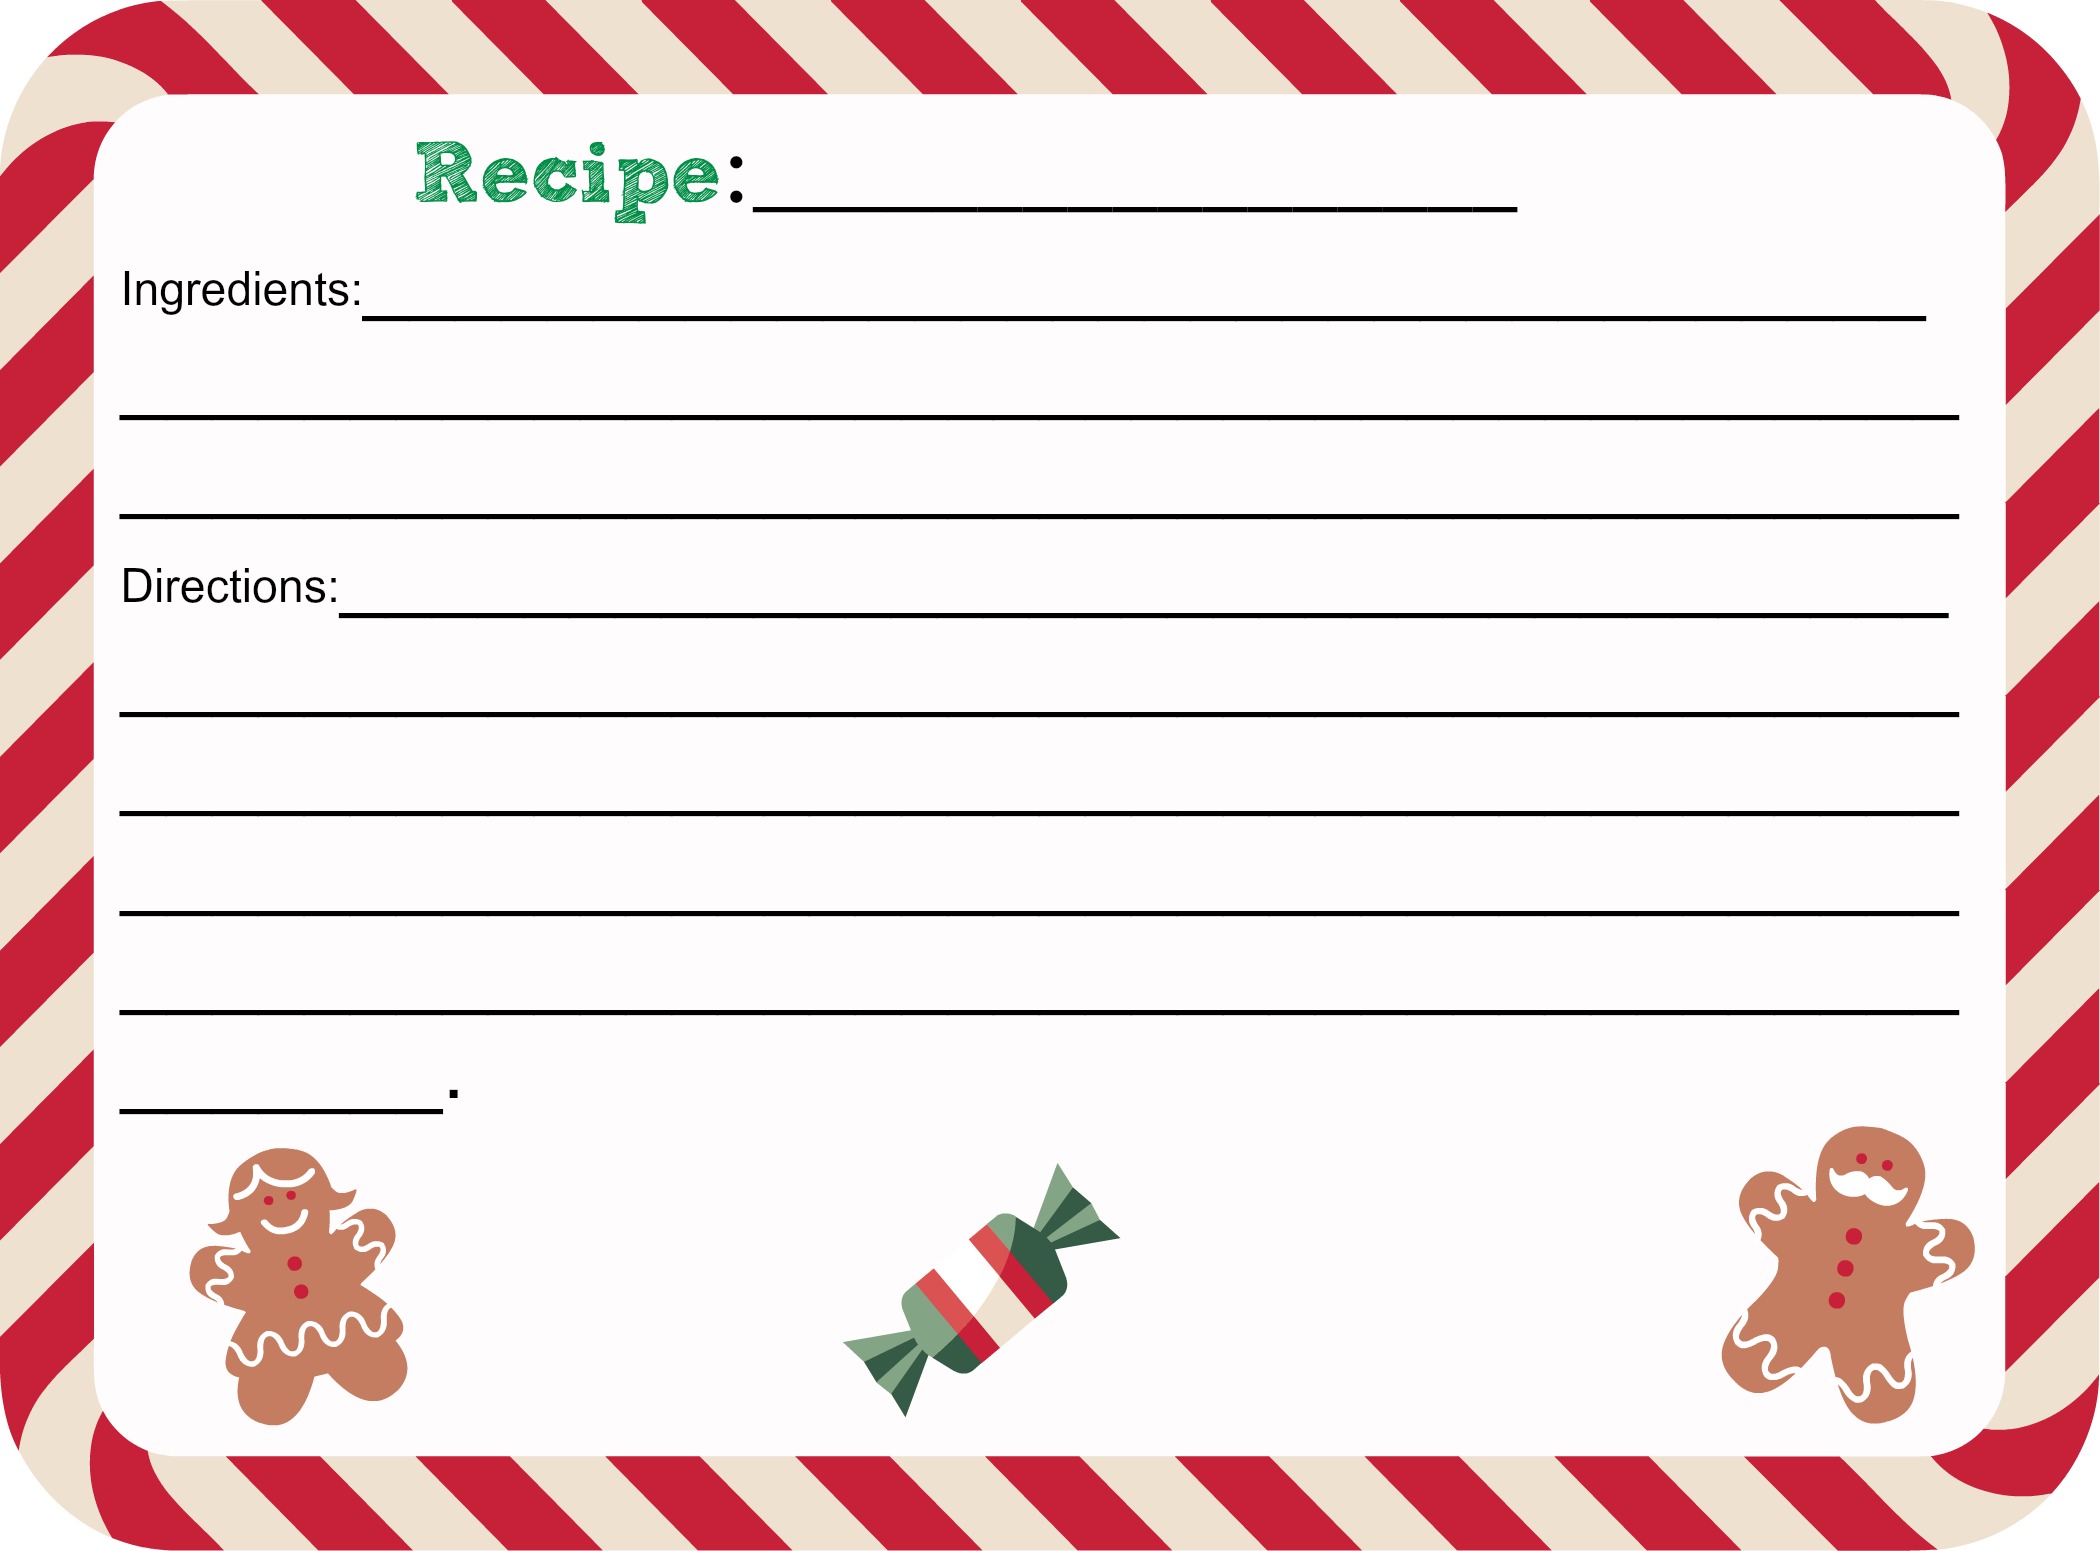 8-best-images-of-free-printable-cute-recipe-card-template-free-printable-recipe-card-template